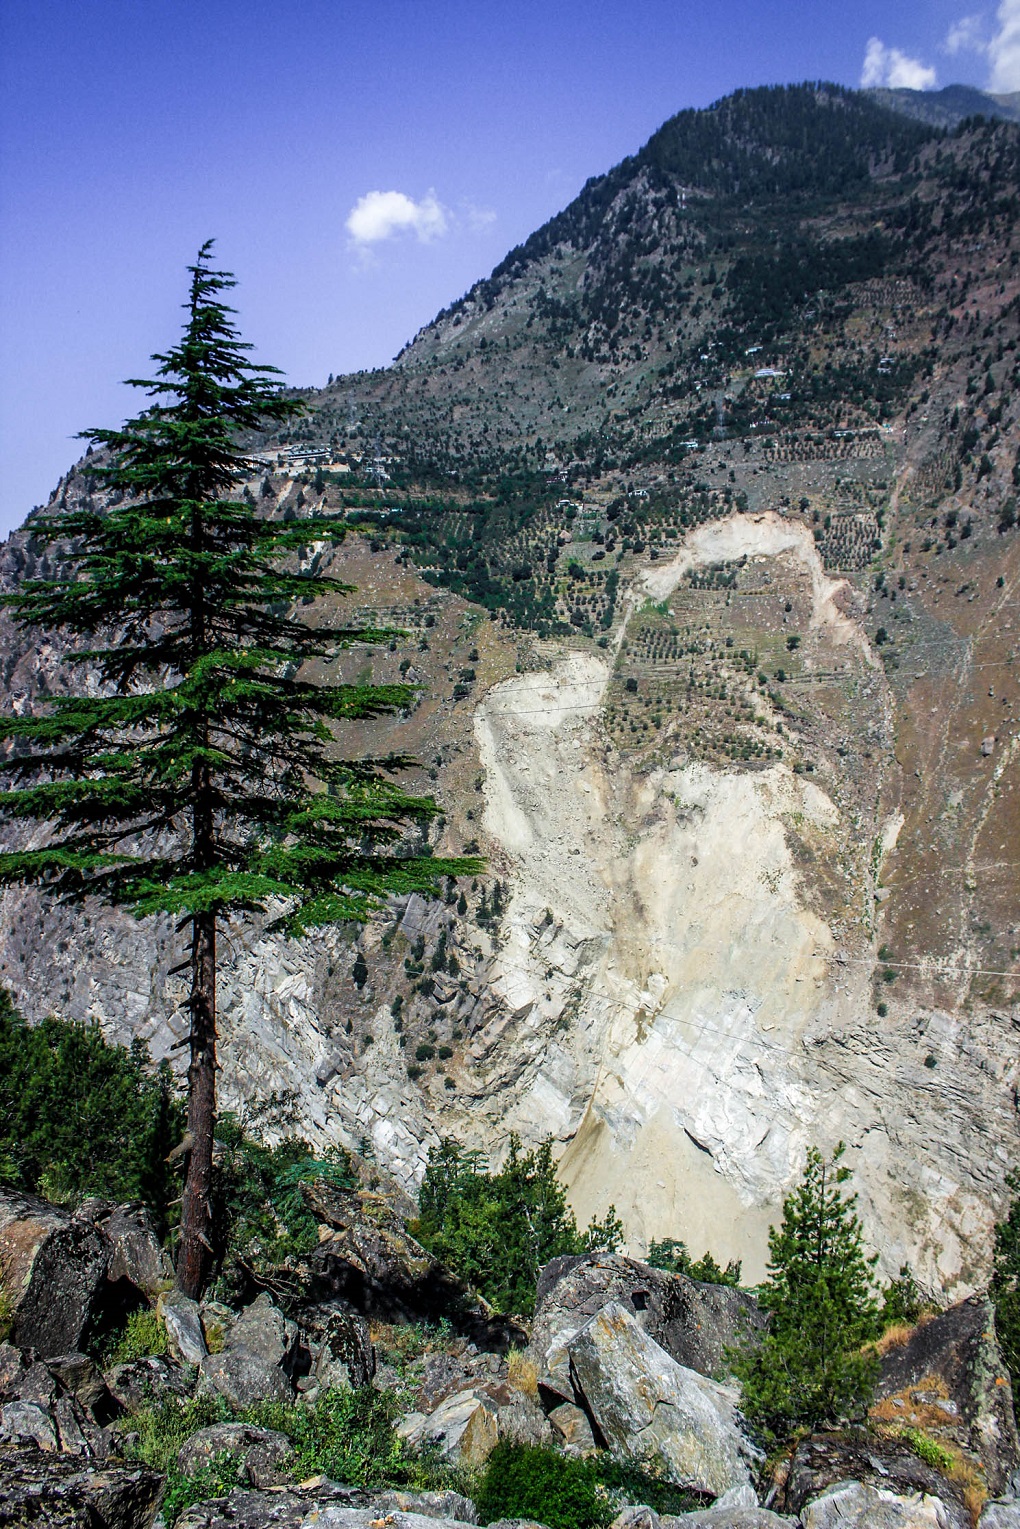 Urni landslide near tunnel for 1,200 MW Karcham Wangtoo project [image by Sumit Mahar]